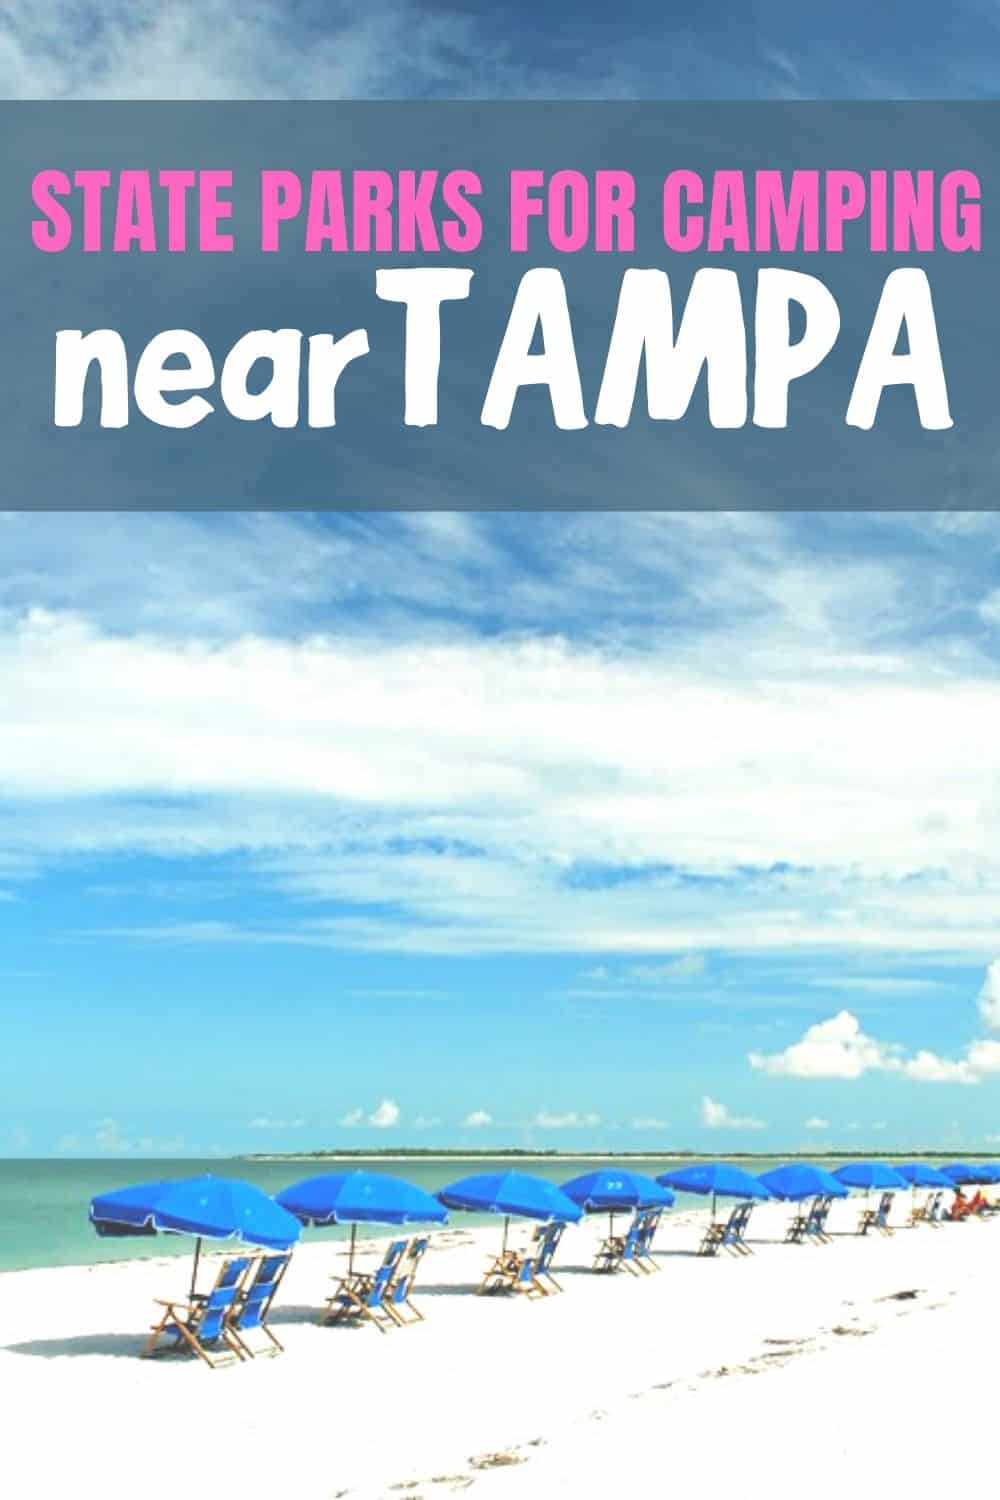 Best State Parks near Tampa - Florida